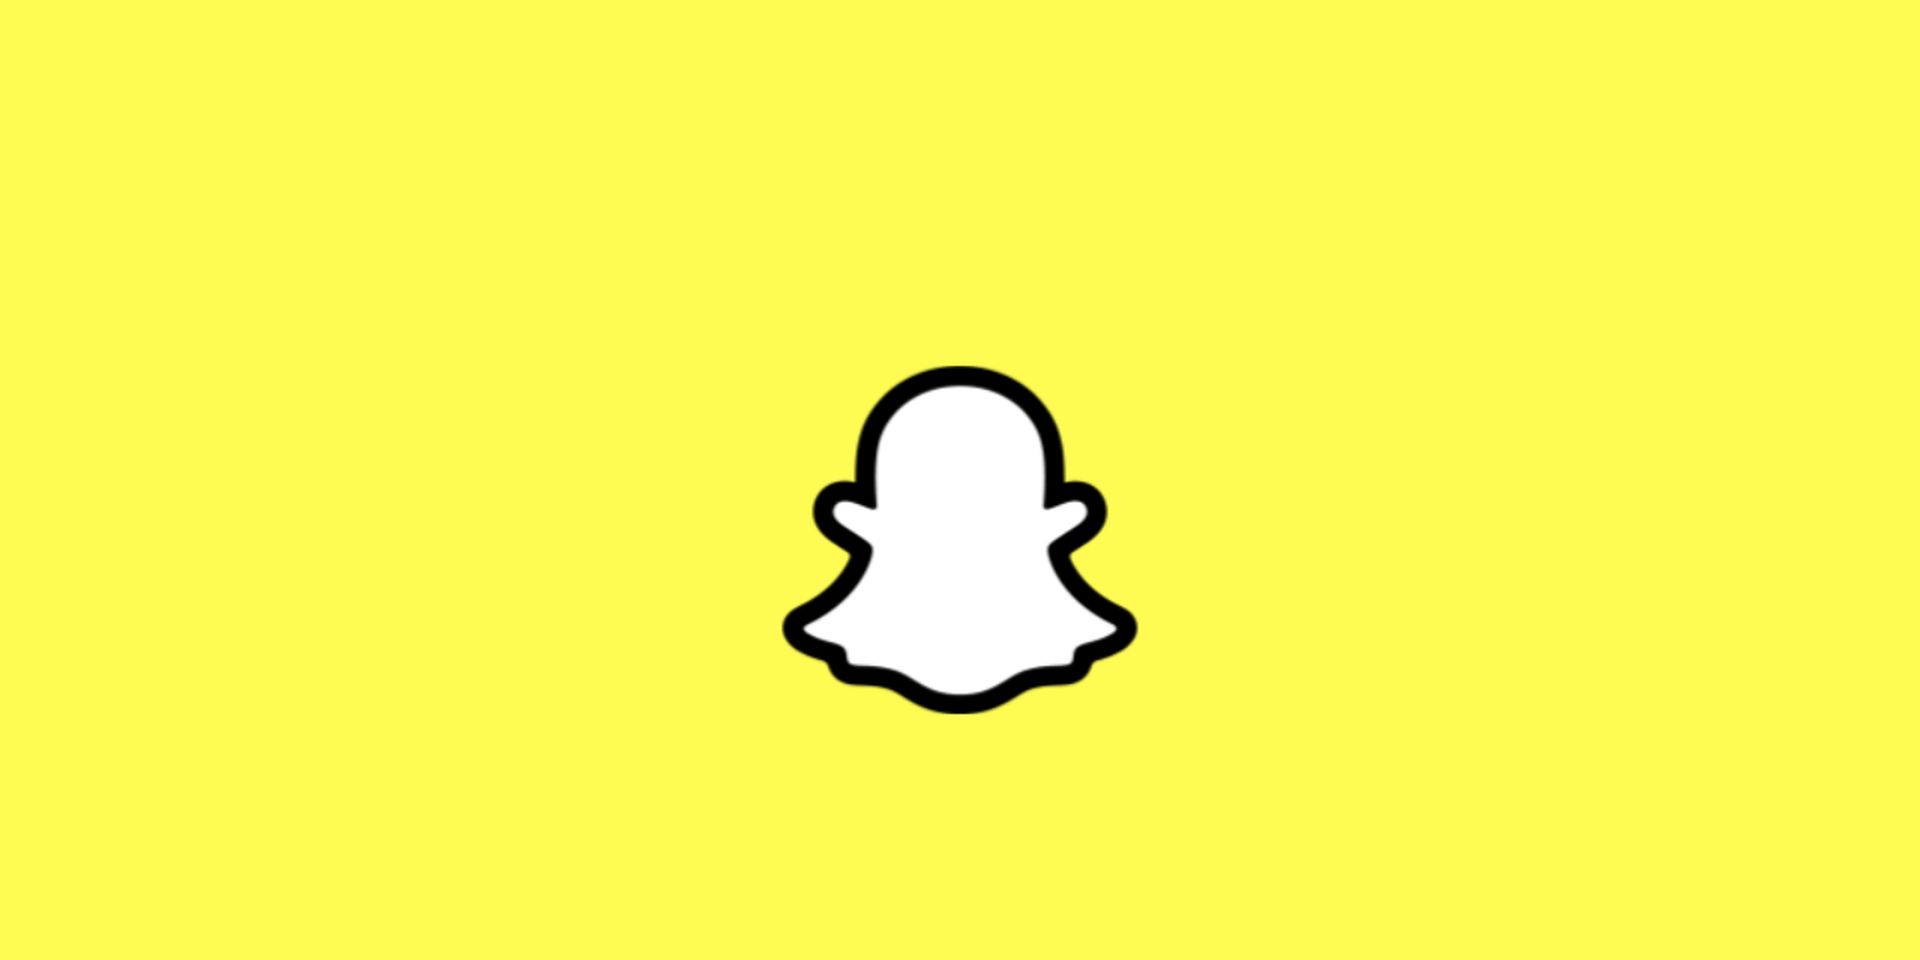 In this article, we will cover the Snapchat Plus best friends list, so you can learn who your closest Snapchat friends are and how the Snapchat solar system works.